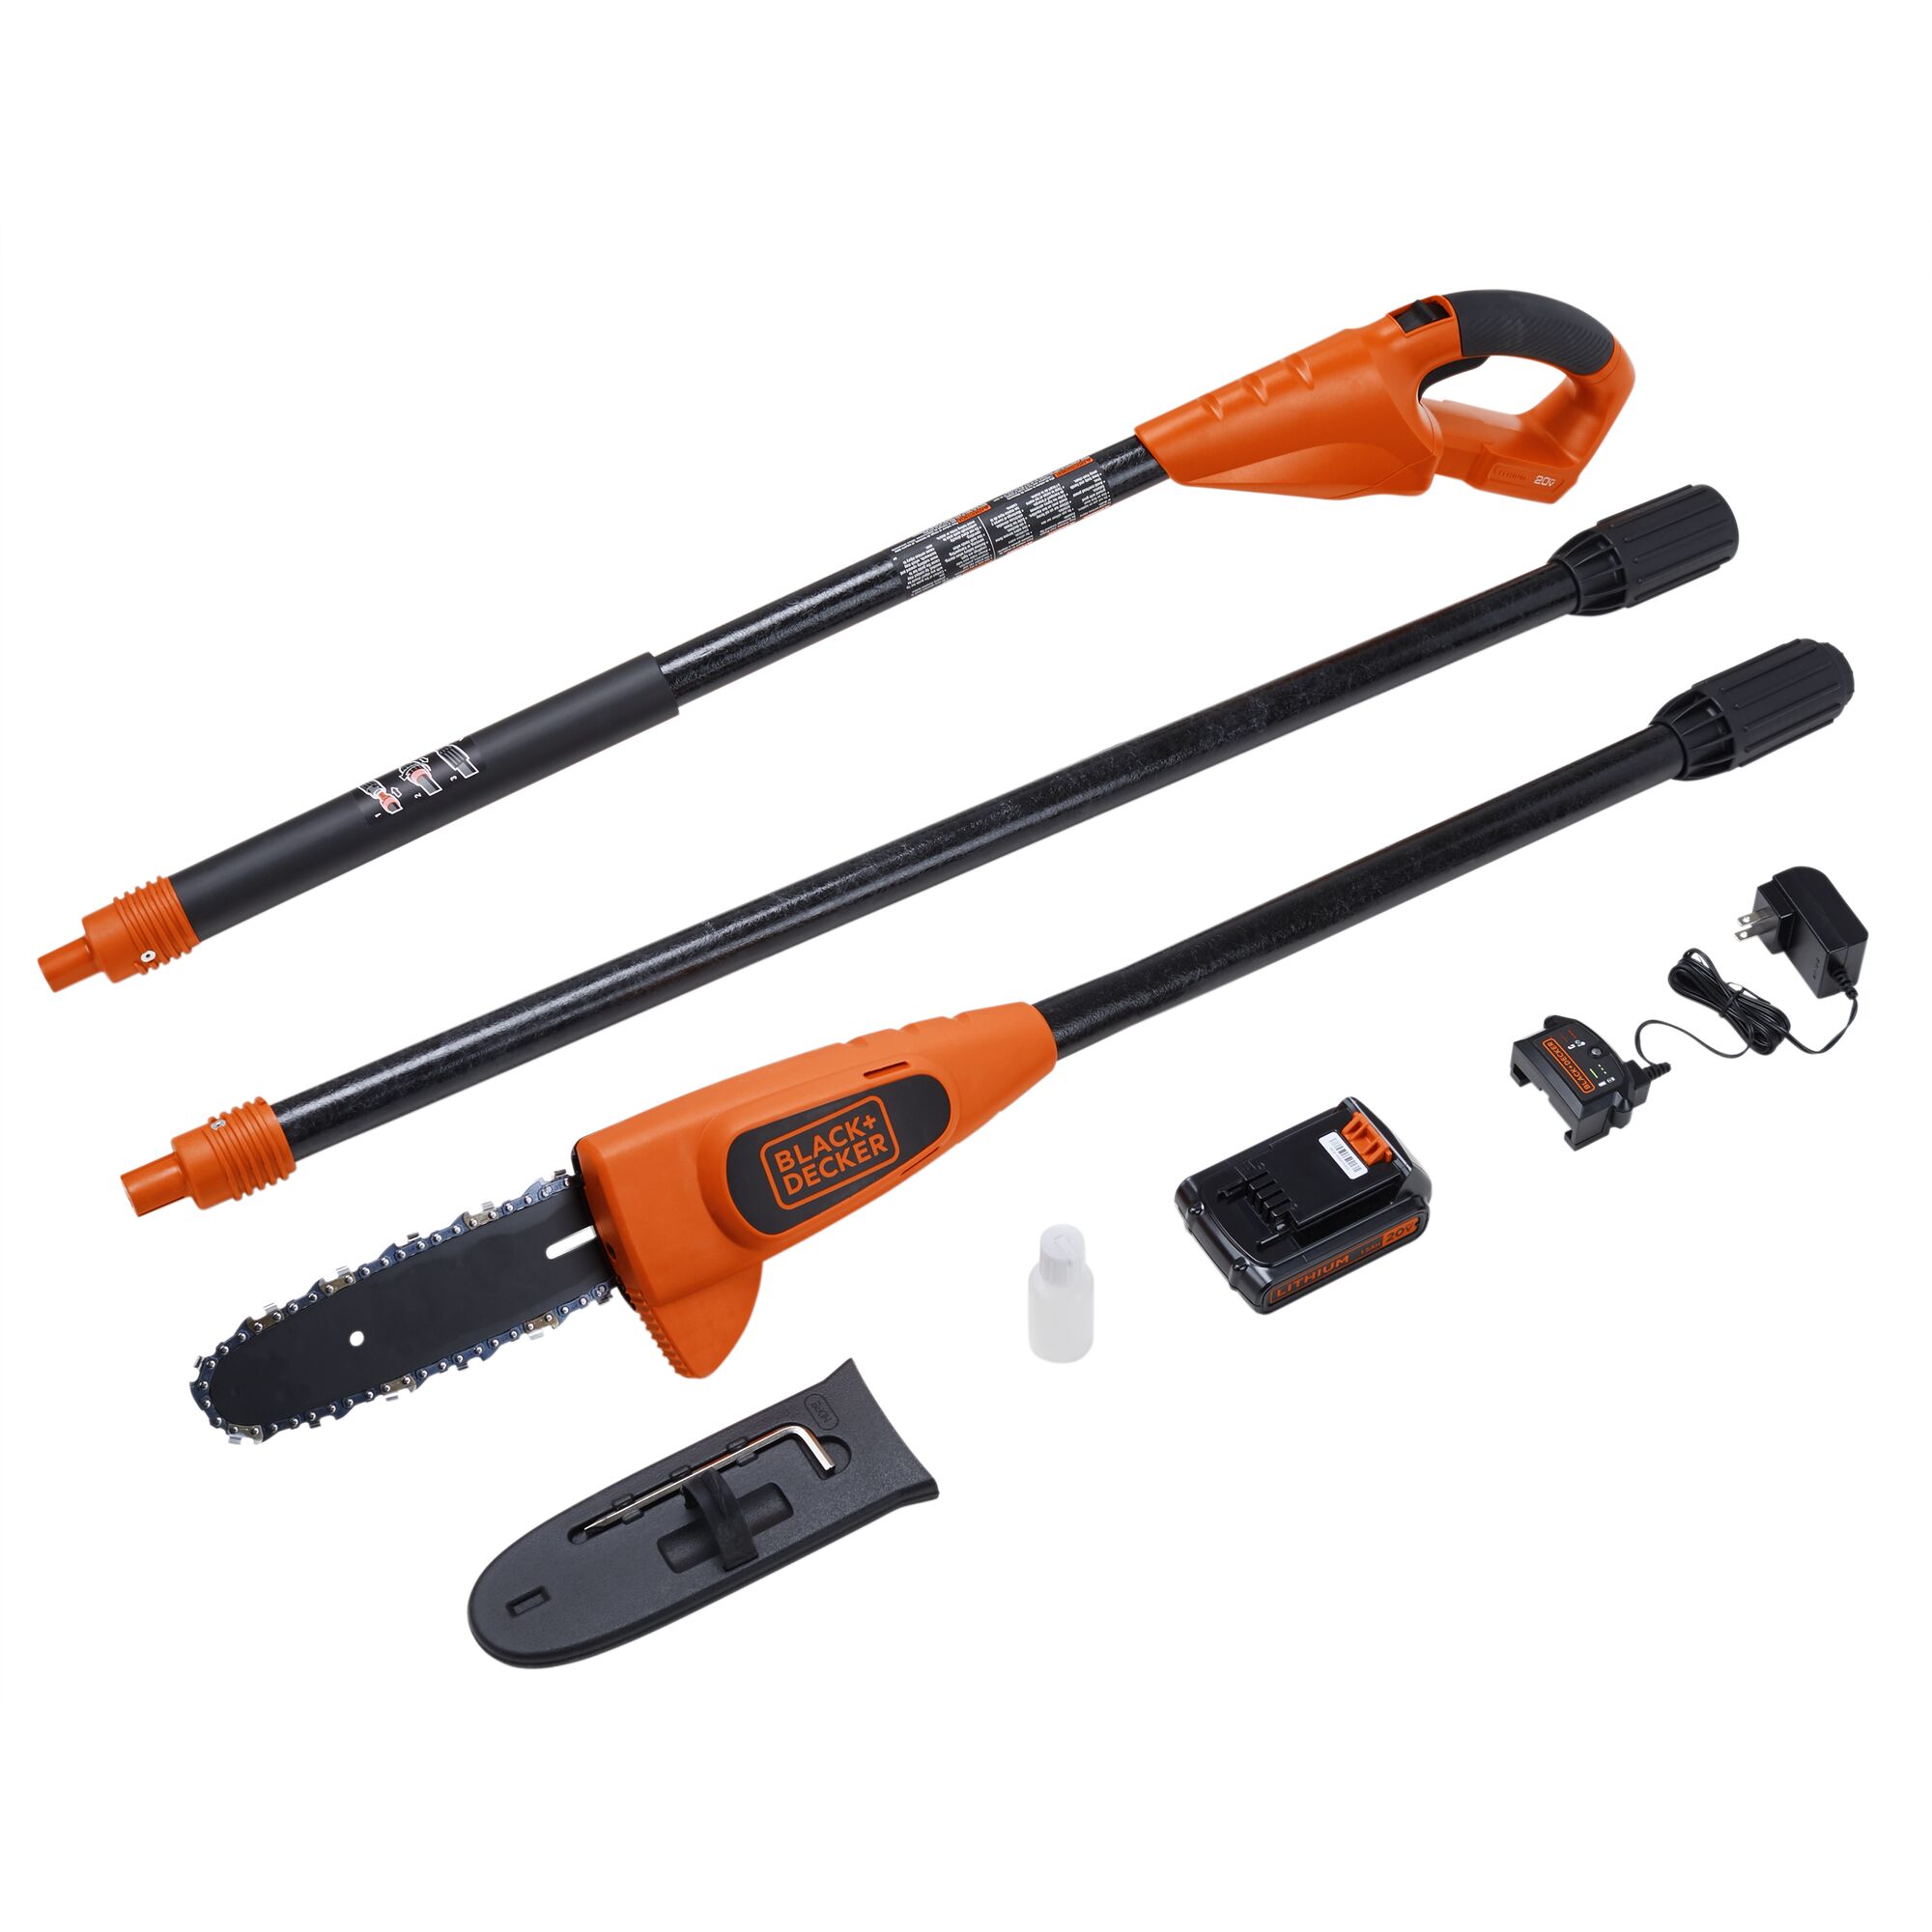 Lithium Pruning Saw and included accessories